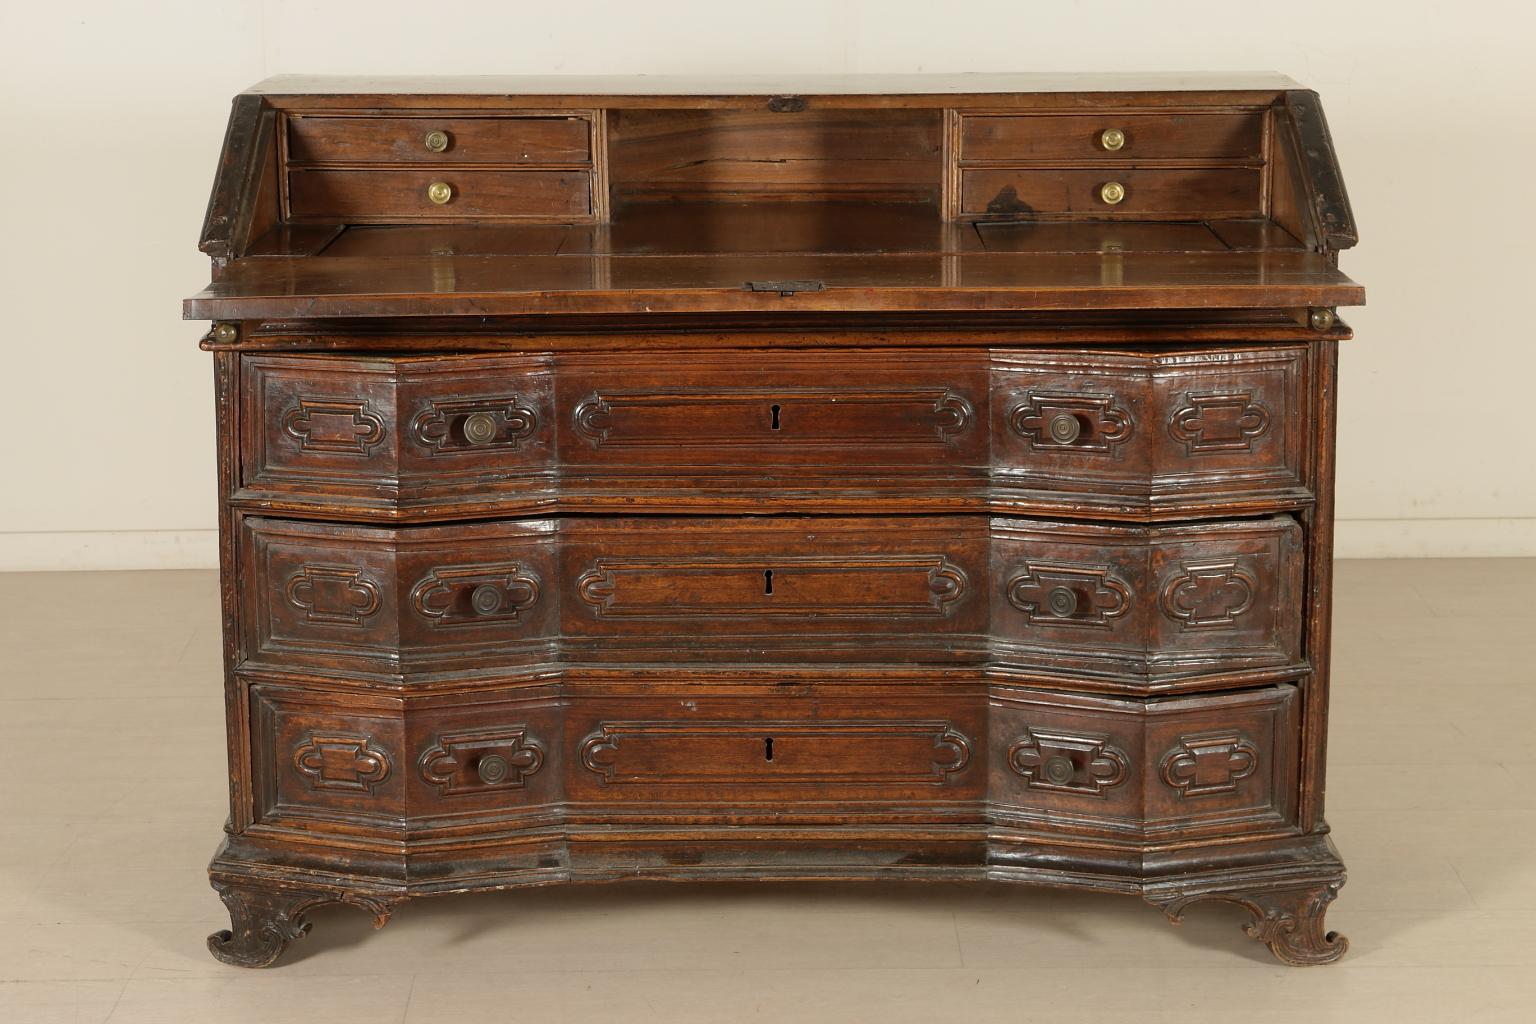 An impressive Lombard chest of drawers, three drawers with serpentine front plus a linear one under the top, slightly jutting. Round uprights with a fluted pilaster strip. Walnut burr veneered reserves, ebonized frames. Drop frames on the front.